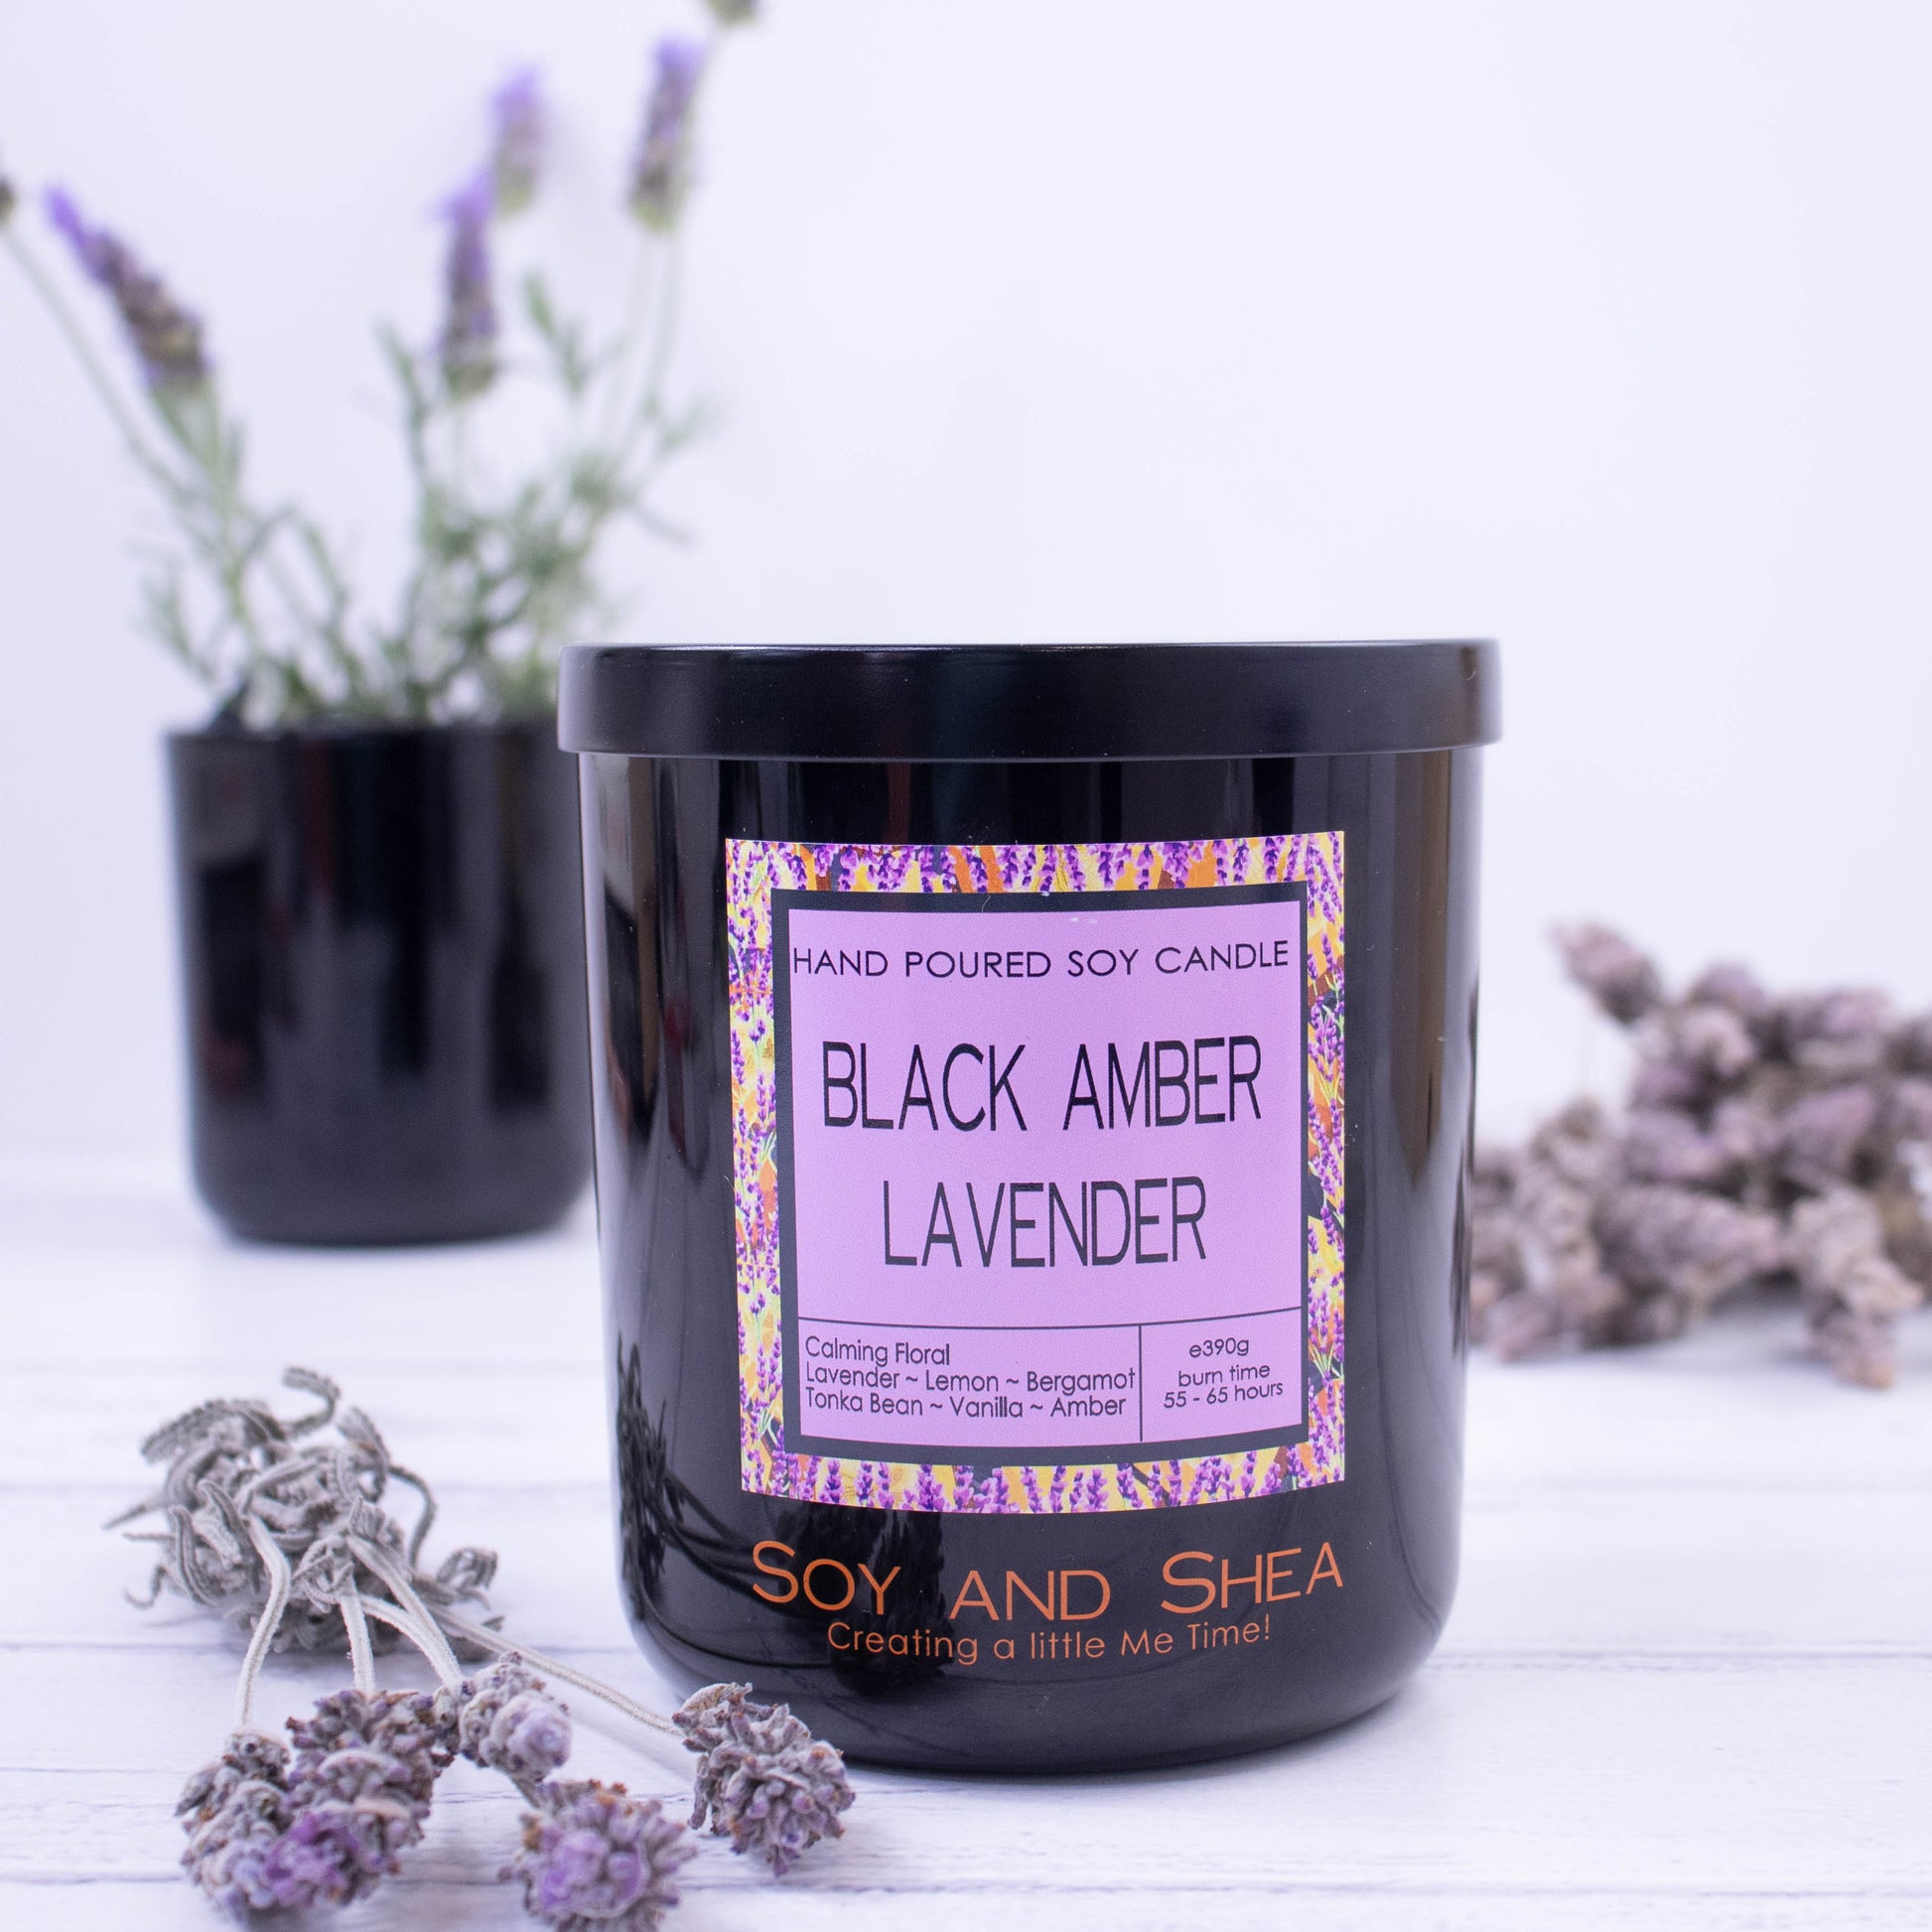 A large black glass candle jar with fragrance label sits to the front of the picture.  There is a black metal lid with an etching of the logo on top.  Surrounding the candle is some dried lavender with a pot of fresh lavender growing in the background